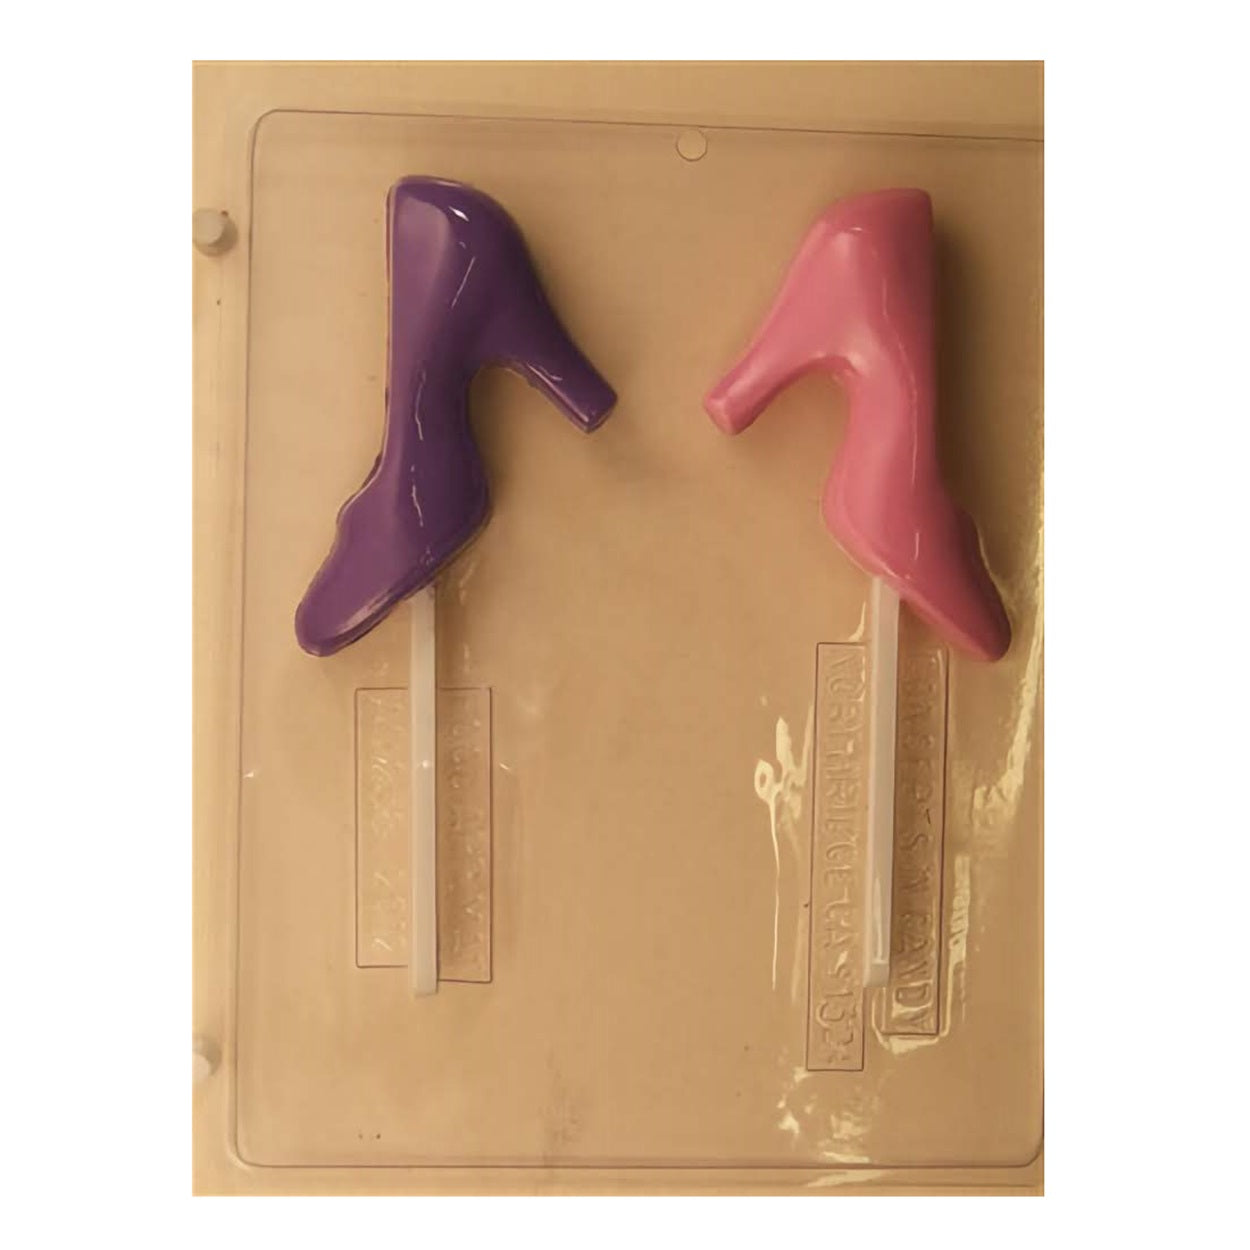 Chocolate mold for creating ladies' high-heeled shoe suckers, featuring two cavities for candy creation. One cavity displays a smooth, elegant high-heel design, while the second cavity shows the same style with a glossy finish. Both are attached to sturdy sticks for easy handling and are set against a durable mold base, ready to be filled with your choice of chocolate or candy melt for stylish, edible treats.